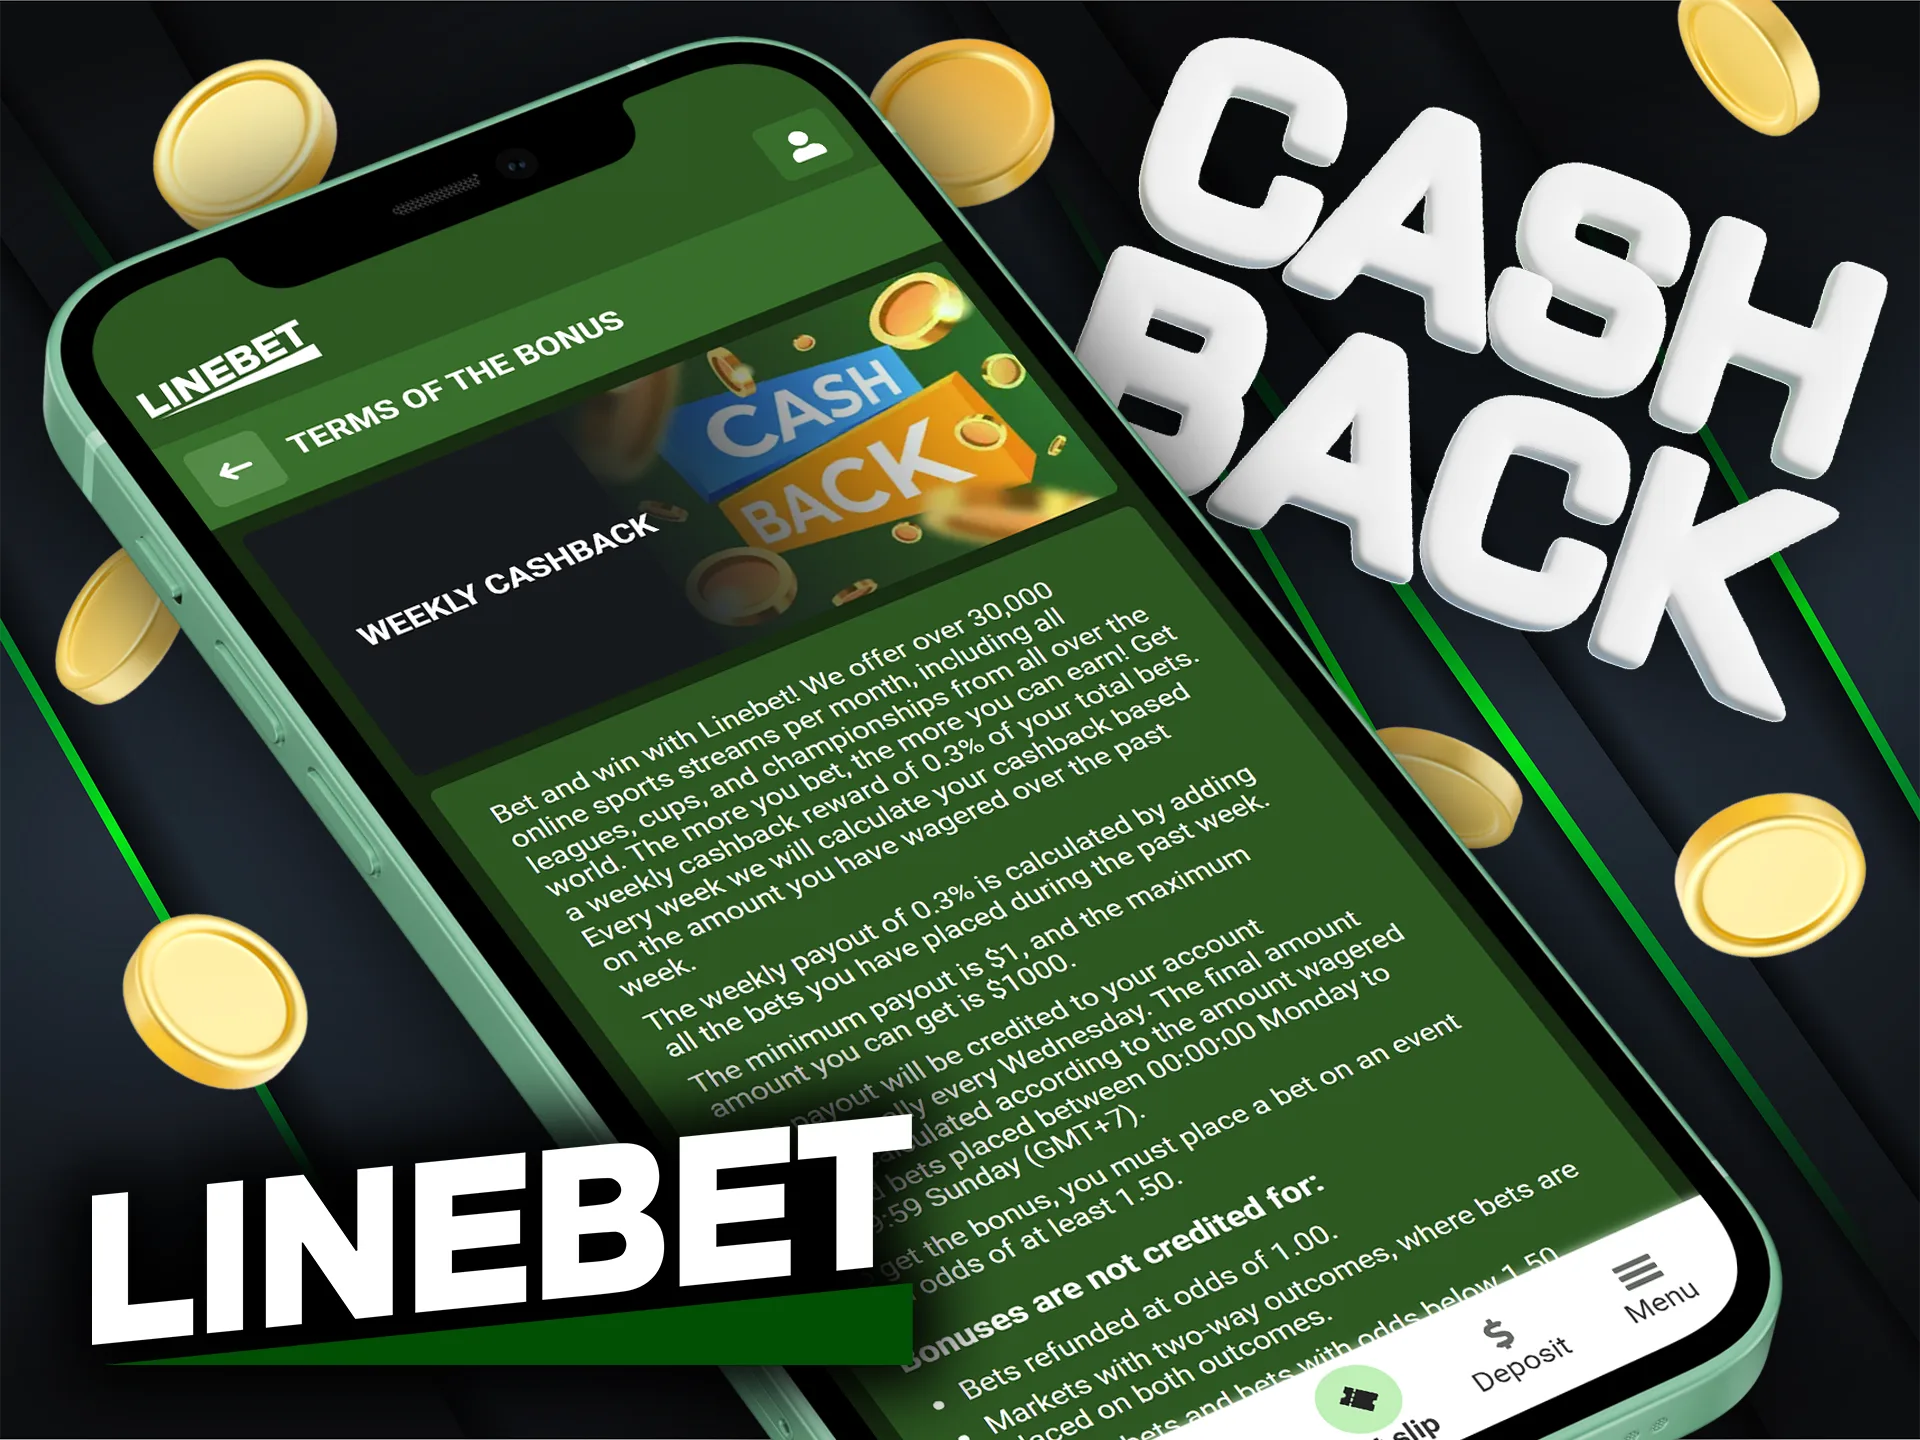 Bet on your favorite sports at Linebet and get cashback.